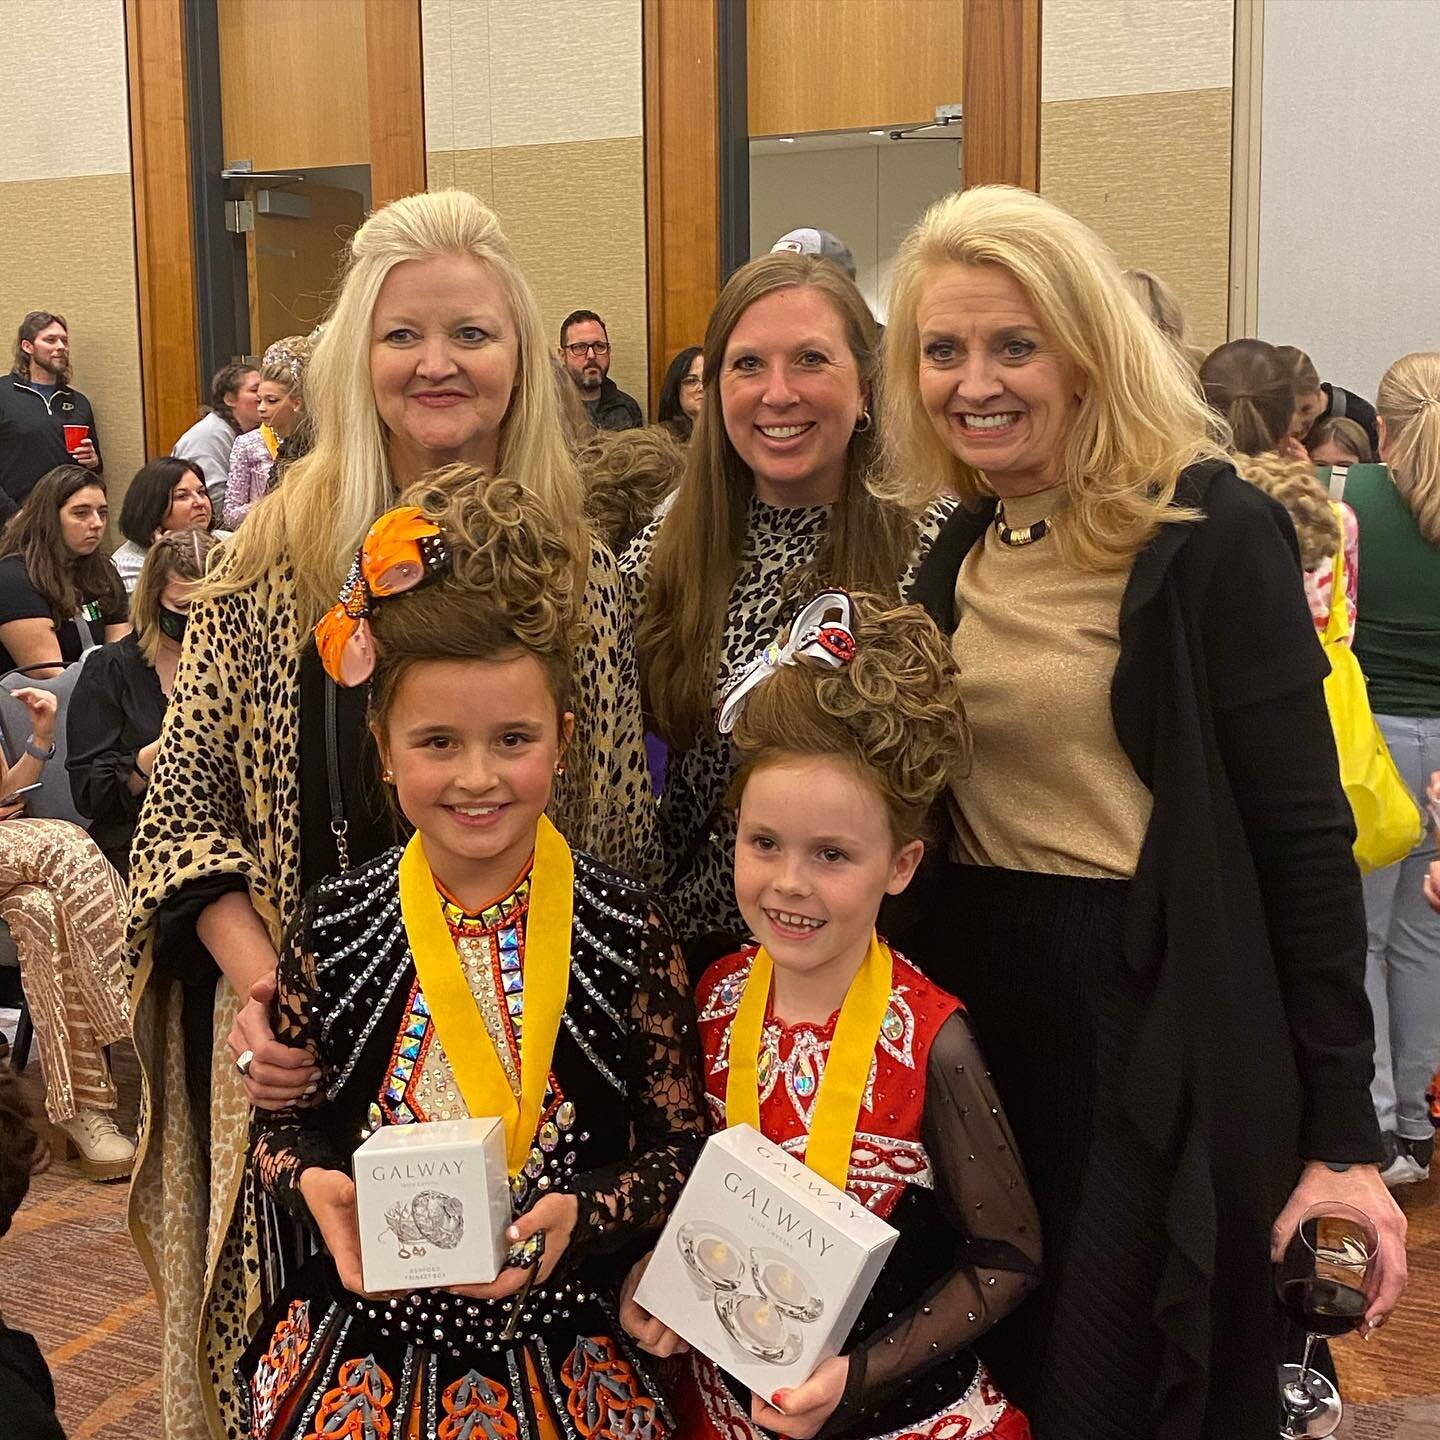 Trad Set Day! So proud of our 11 dancers who took to the Oireachtas stage today&mdash;many for the first time! 🏆 We are so proud!! 

Special shout-out to Foley who won the U8 competition! 👑 

U7: Cece 4th, Maeve 6th 
U8: Foley 1st, Aine 2nd, Estell